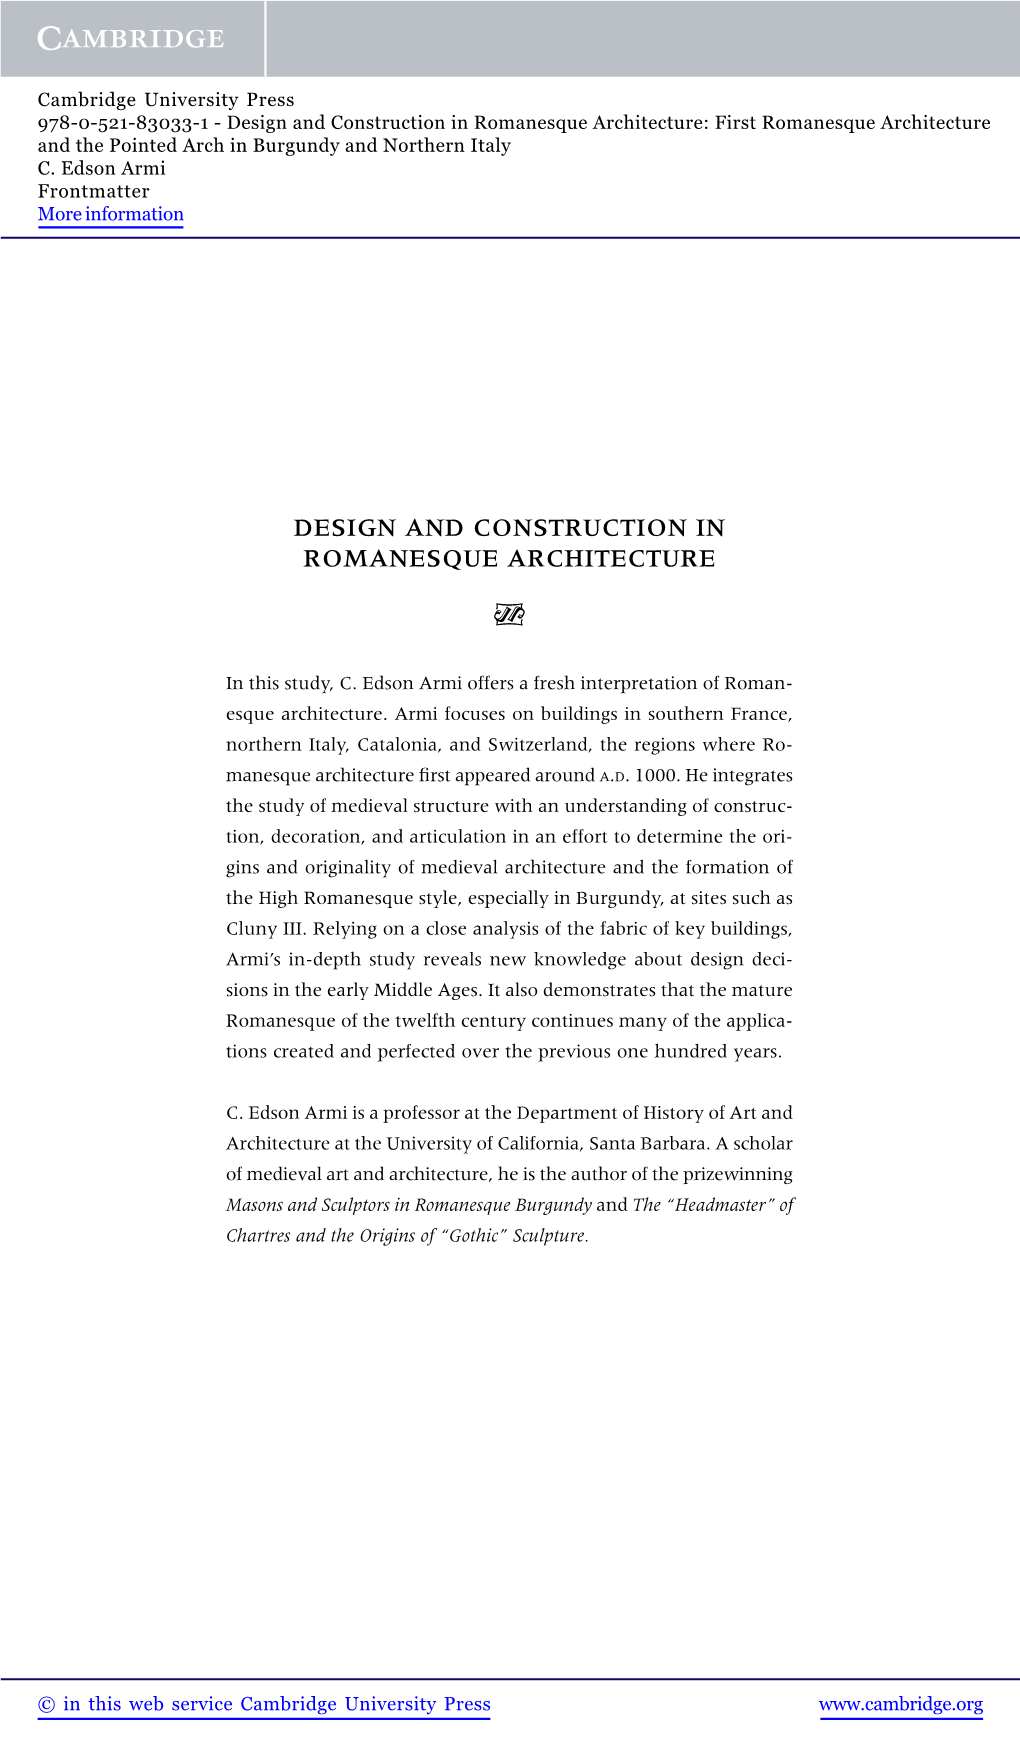 Design and Construction in Romanesque Architecture: First Romanesque Architecture and the Pointed Arch in Burgundy and Northern Italy C